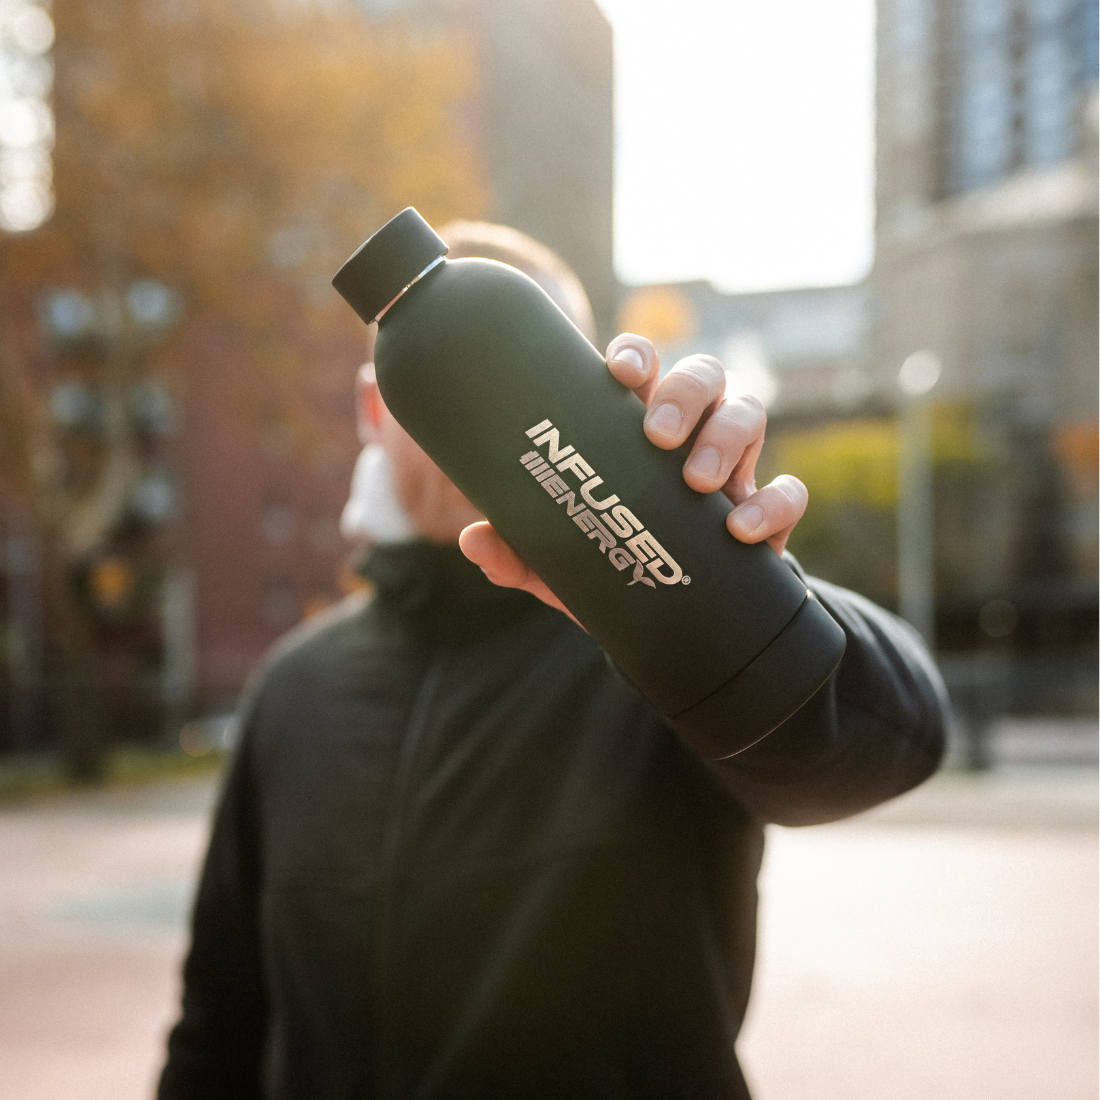 Thermo Infuser Bottle